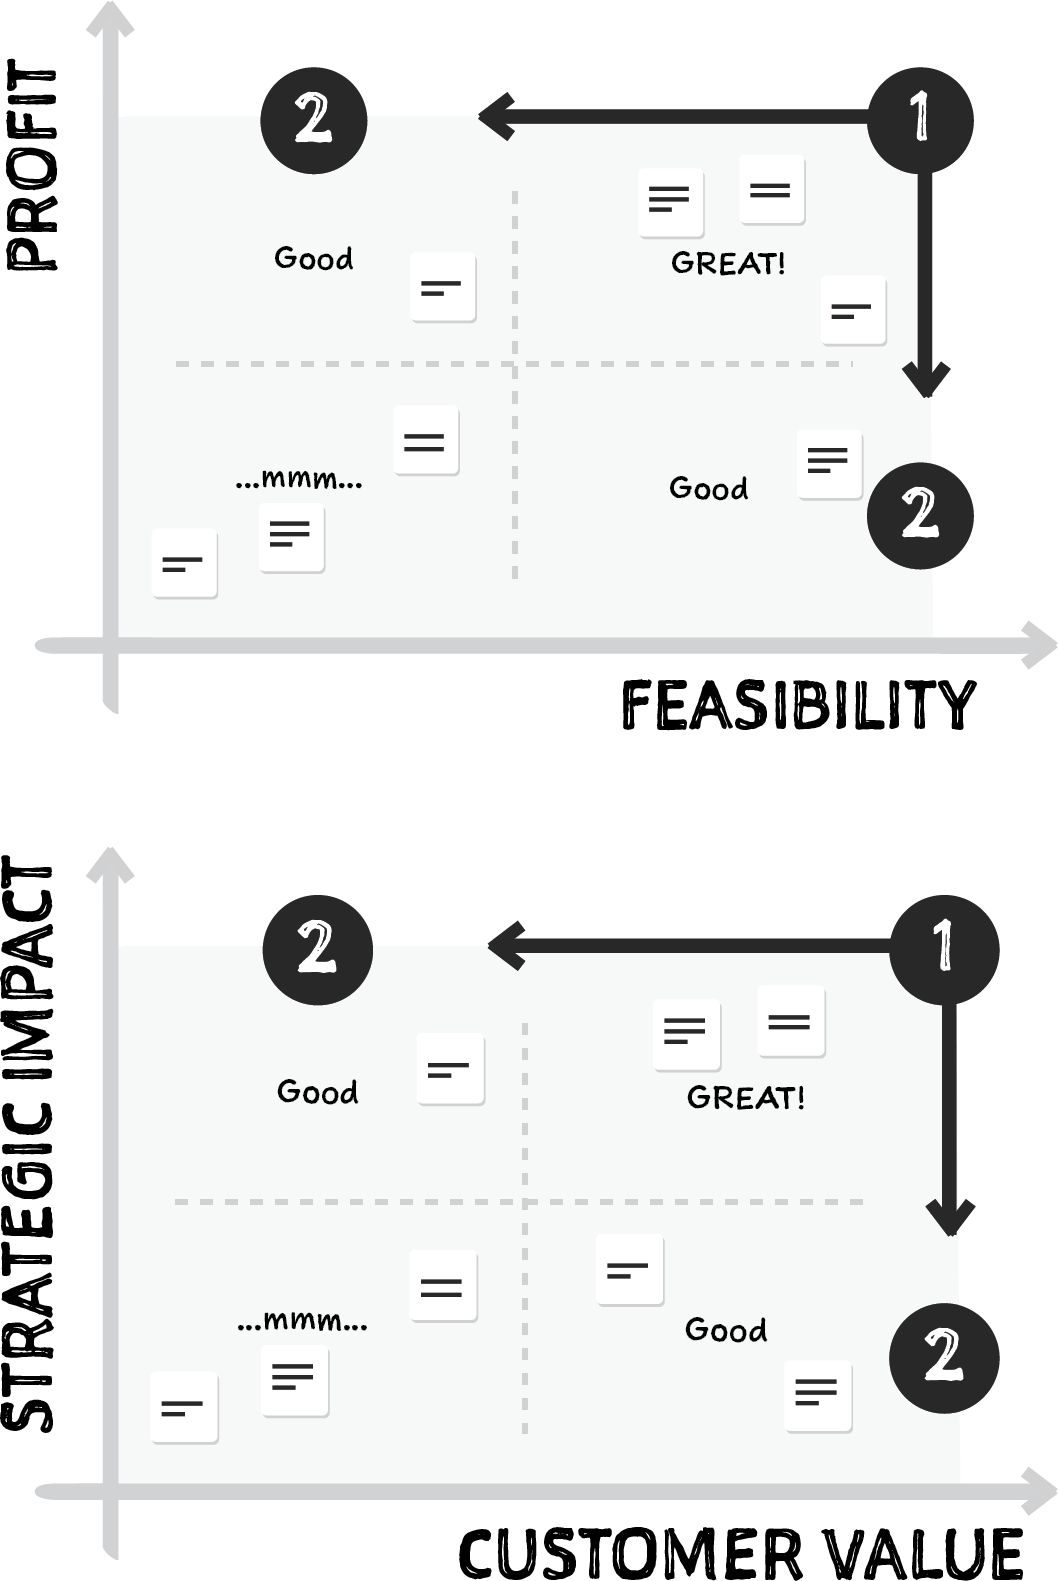 Relative prioritization using dimensions of success (source: ThoughtWorks EDGE Playbook)